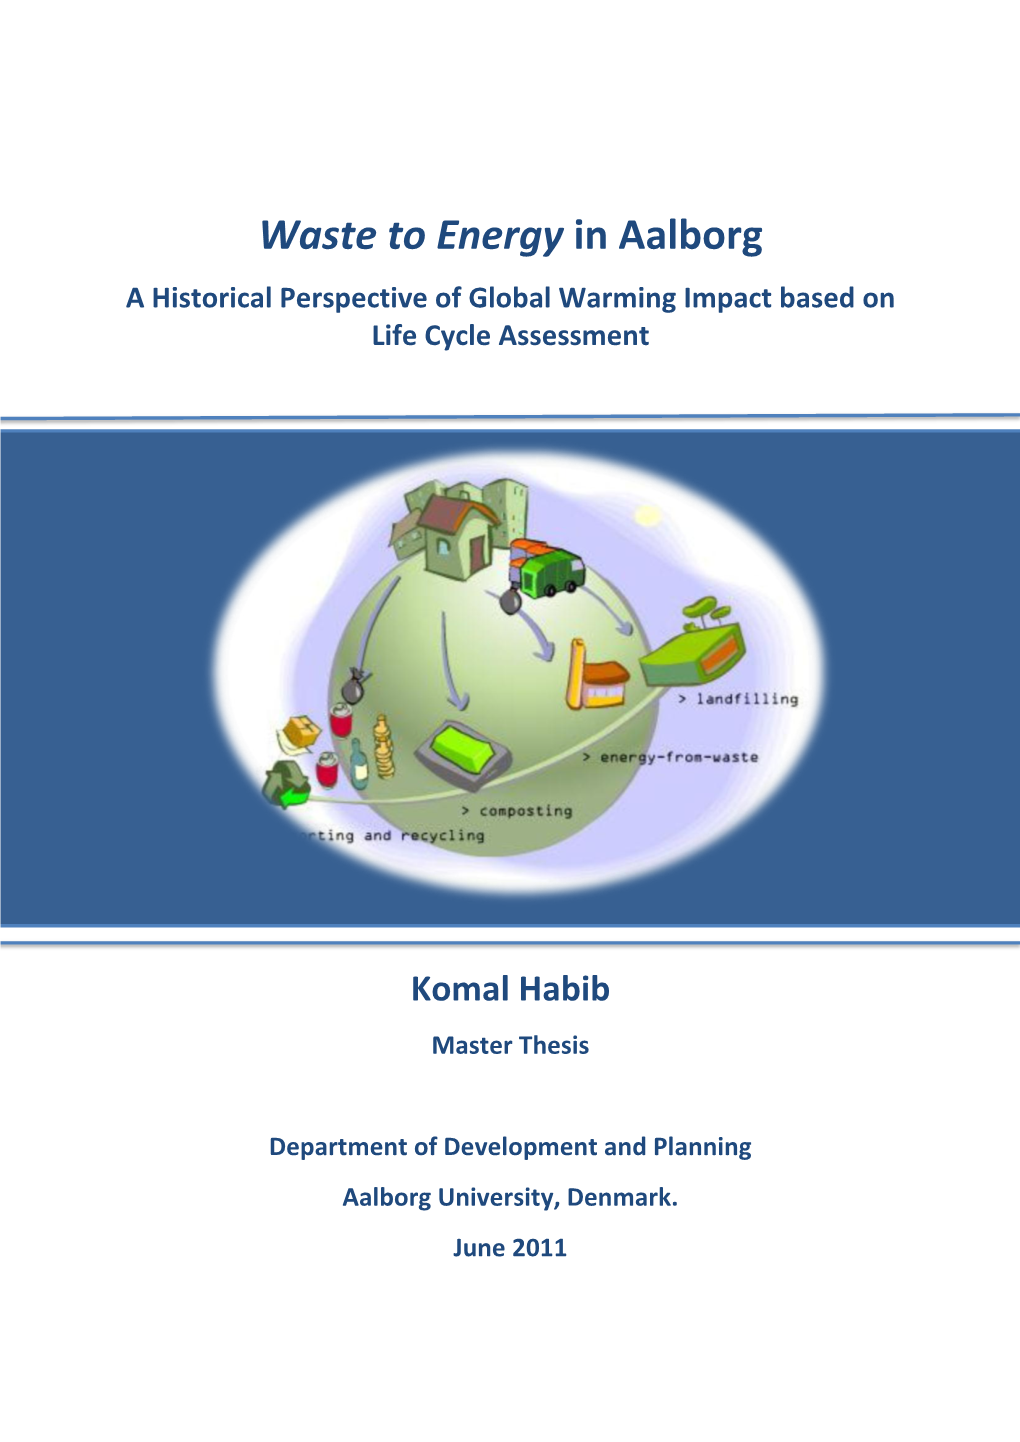 Waste to Energy in Aalborg a Historical Perspective of Global Warming Impact Based on Life Cycle Assessment